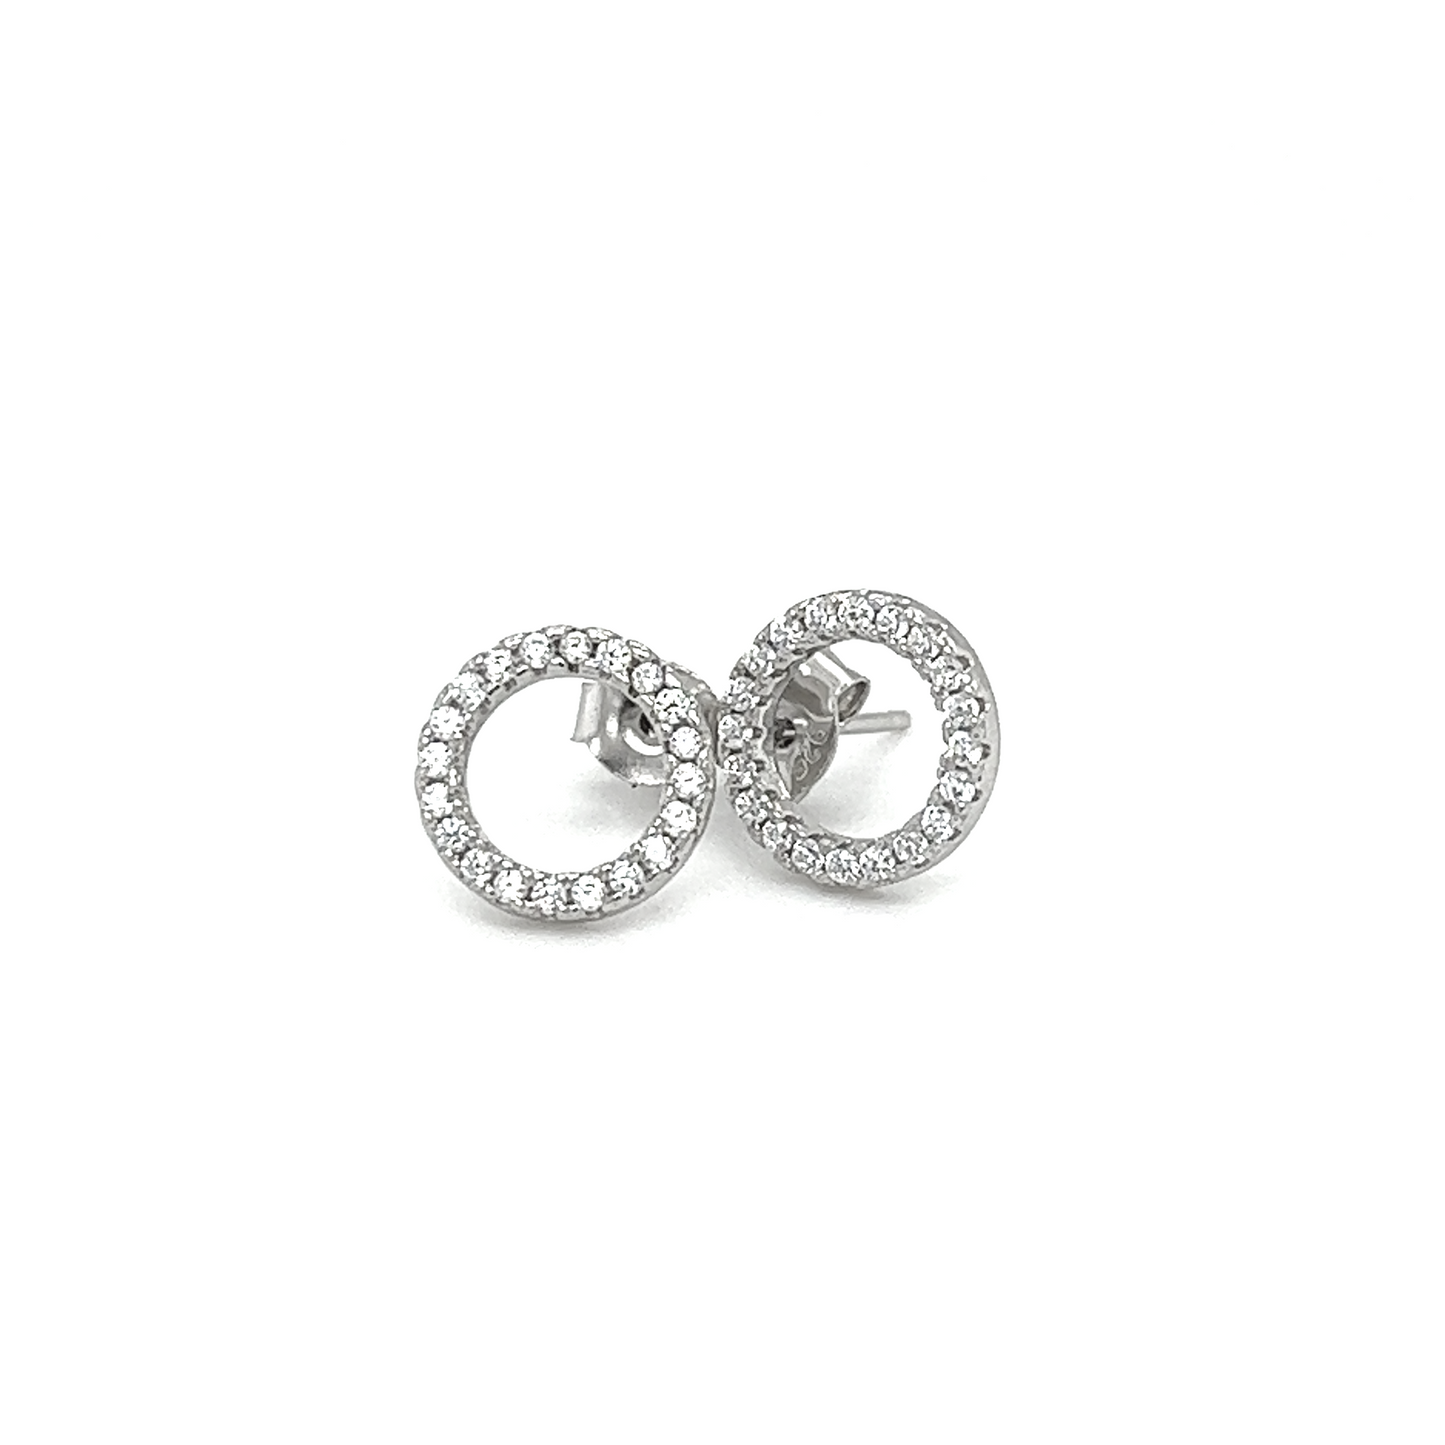 A pair of Super Silver CZ Outline Circle Studs with diamonds and cubic zirconia accents.